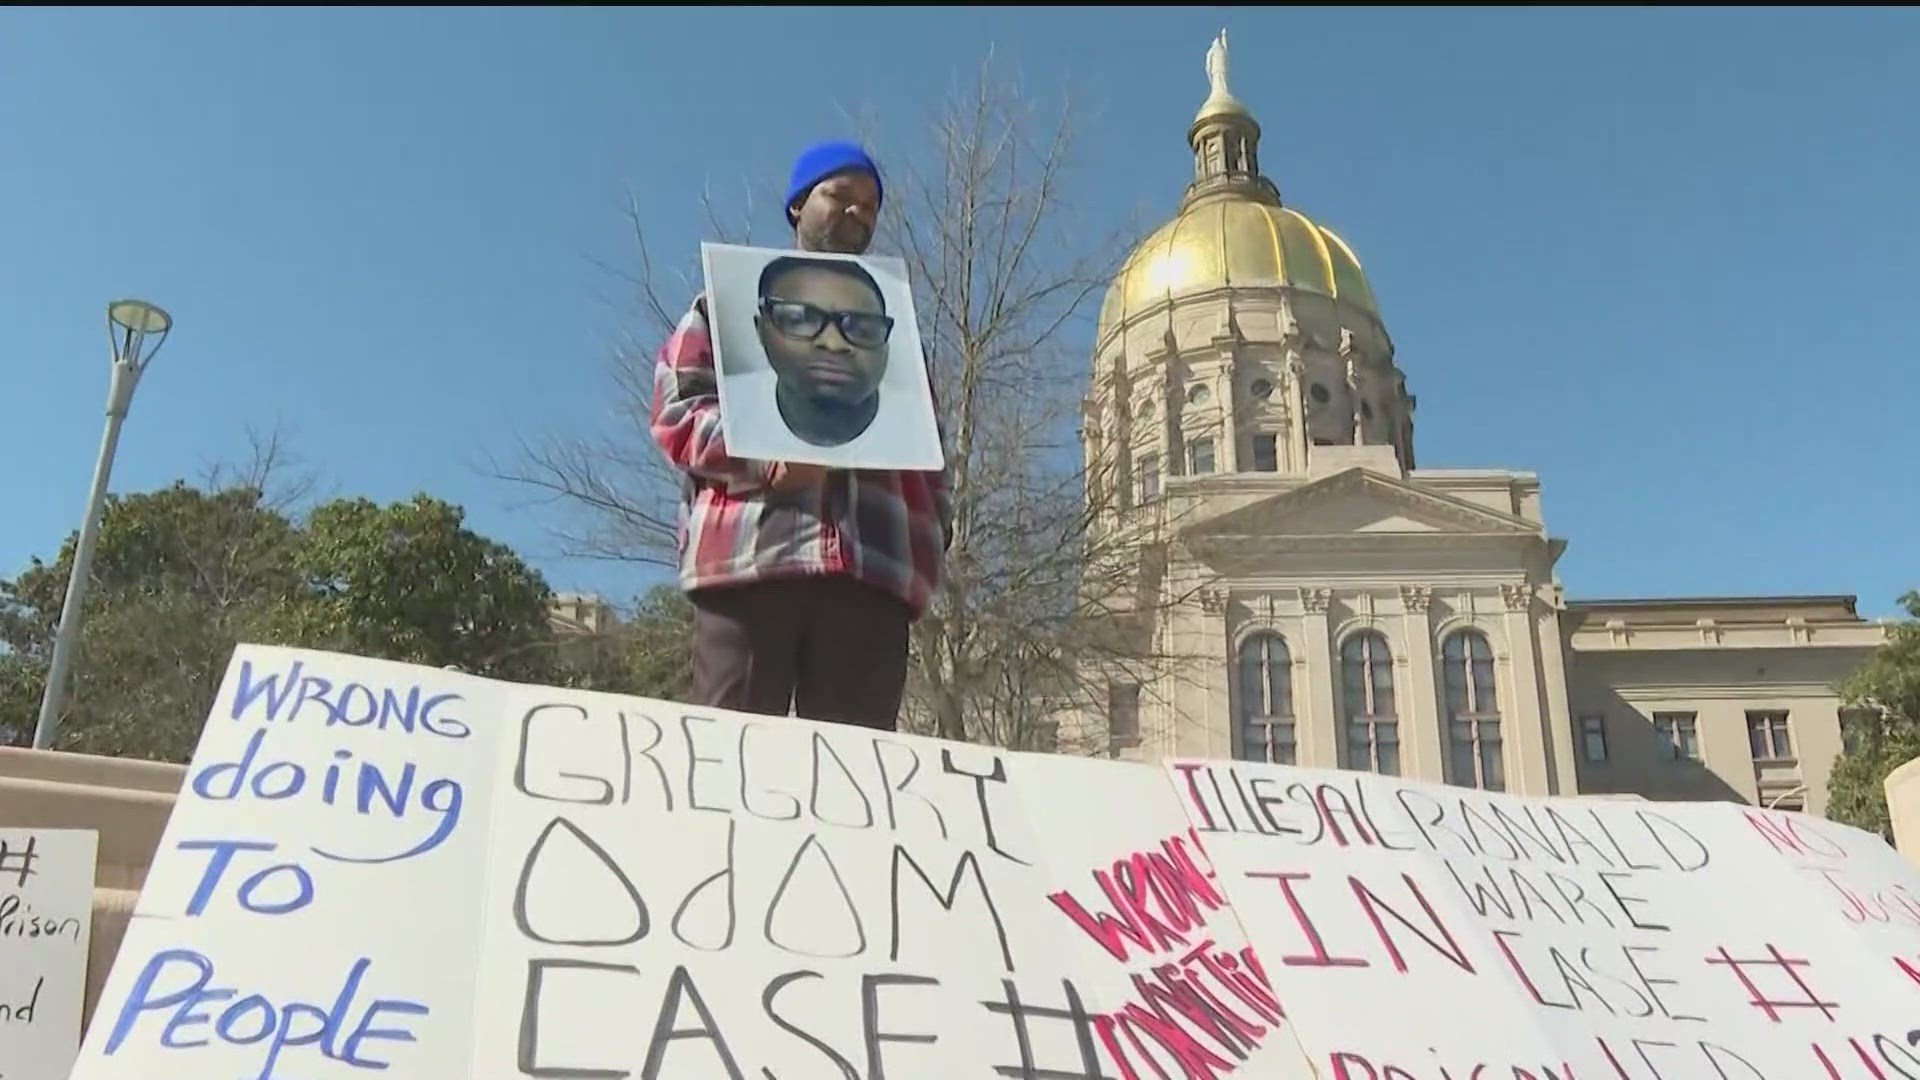 Families and friends of inmates rallied at the state Capitol to protest conditions in the Department of Corrections.